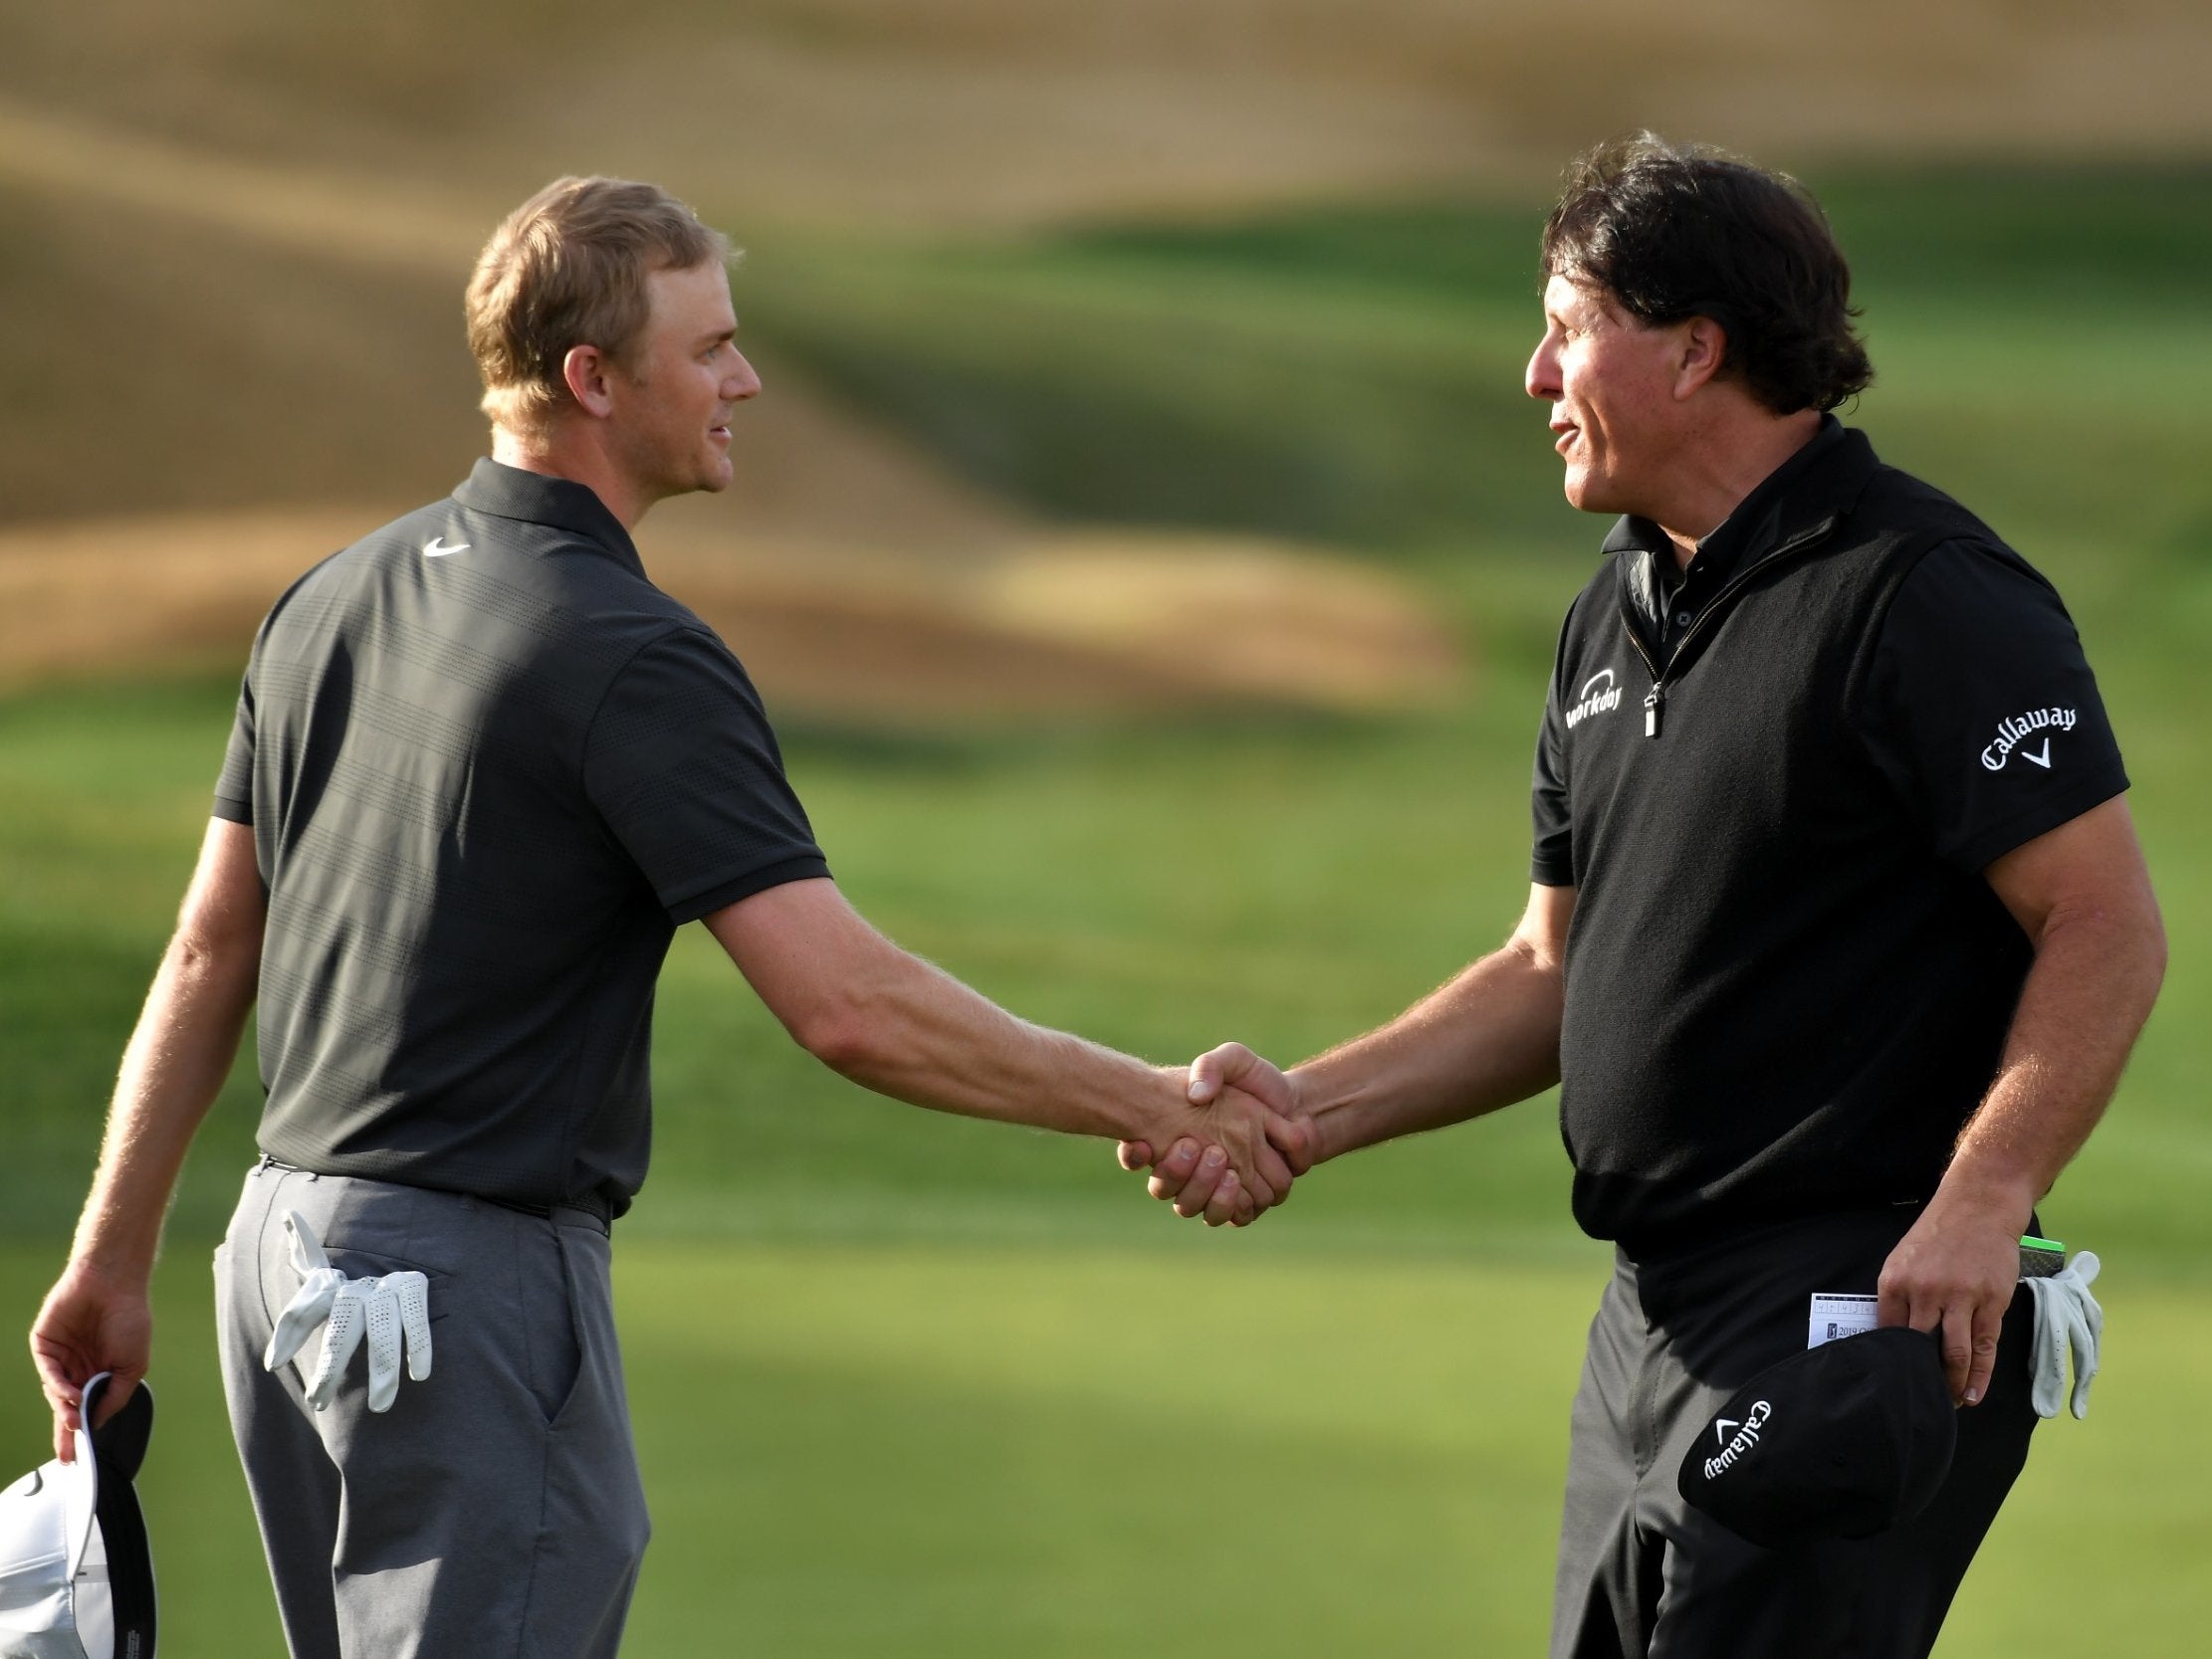 Adam Long and Phil Mickelson embrace after the former wins the Desert Classic